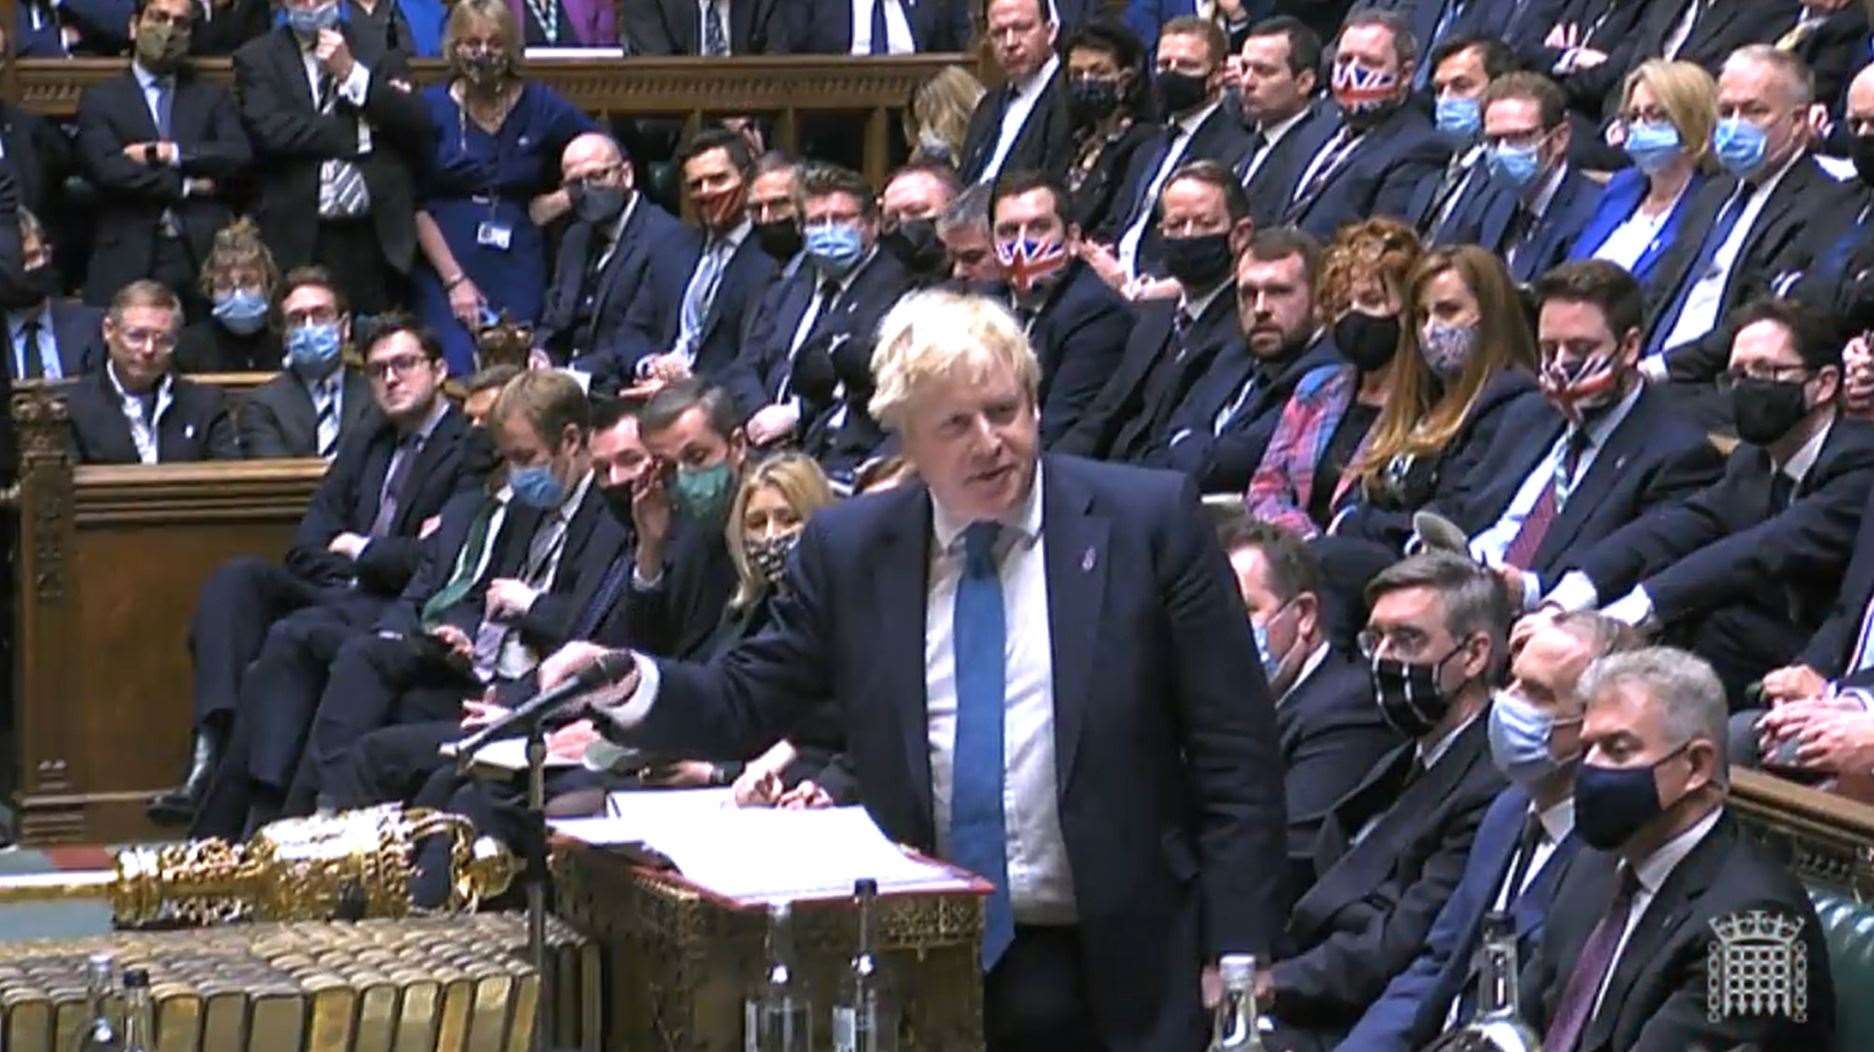 Boris Johnson speaks during Prime Minister’s Questions (House of Commons/PA)